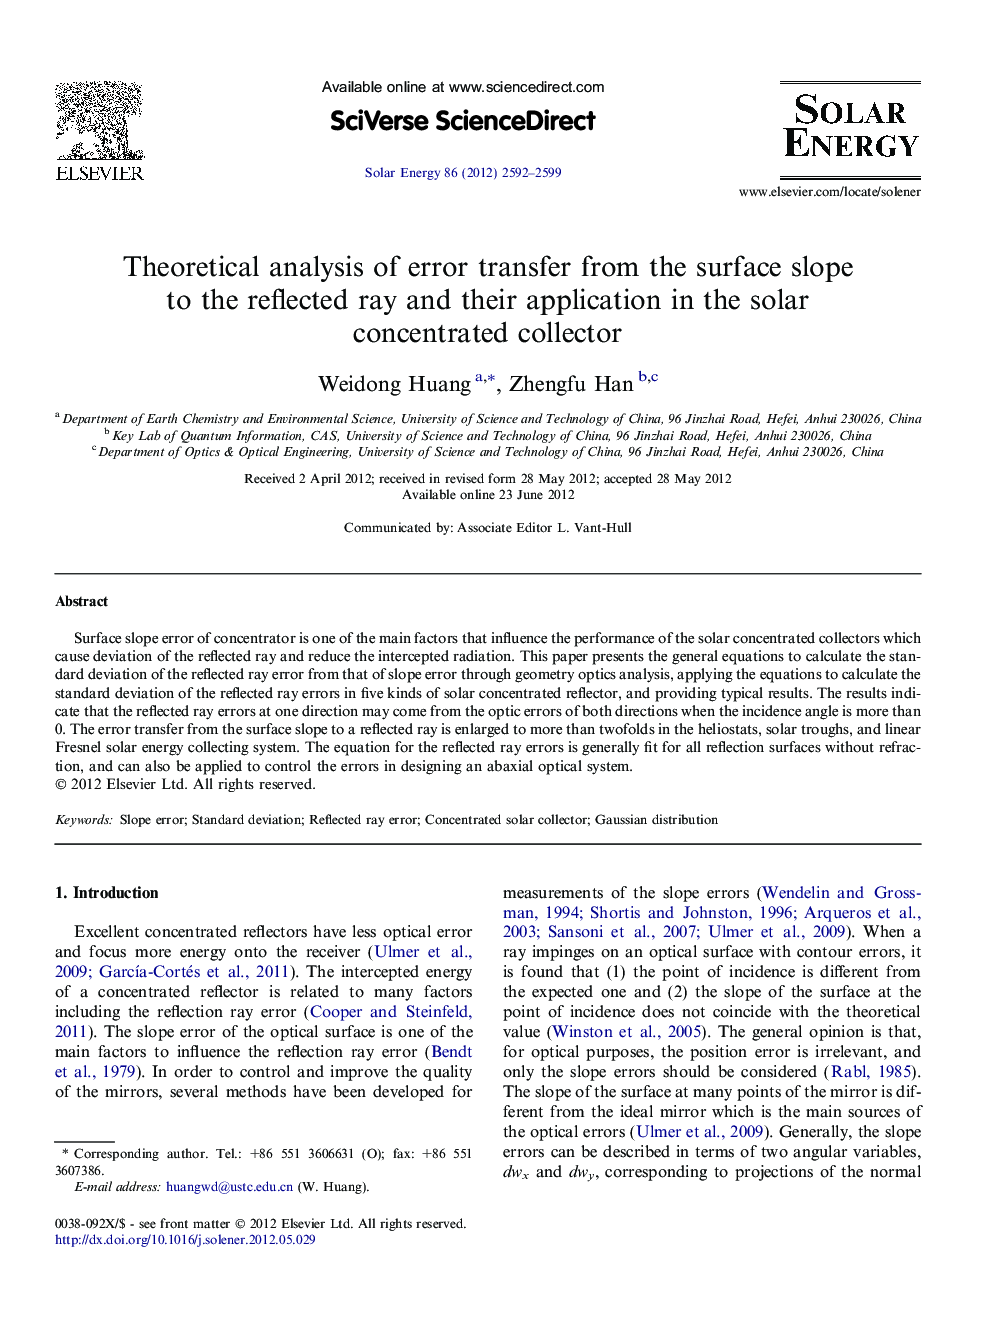 Theoretical analysis of error transfer from the surface slope to the reflected ray and their application in the solar concentrated collector